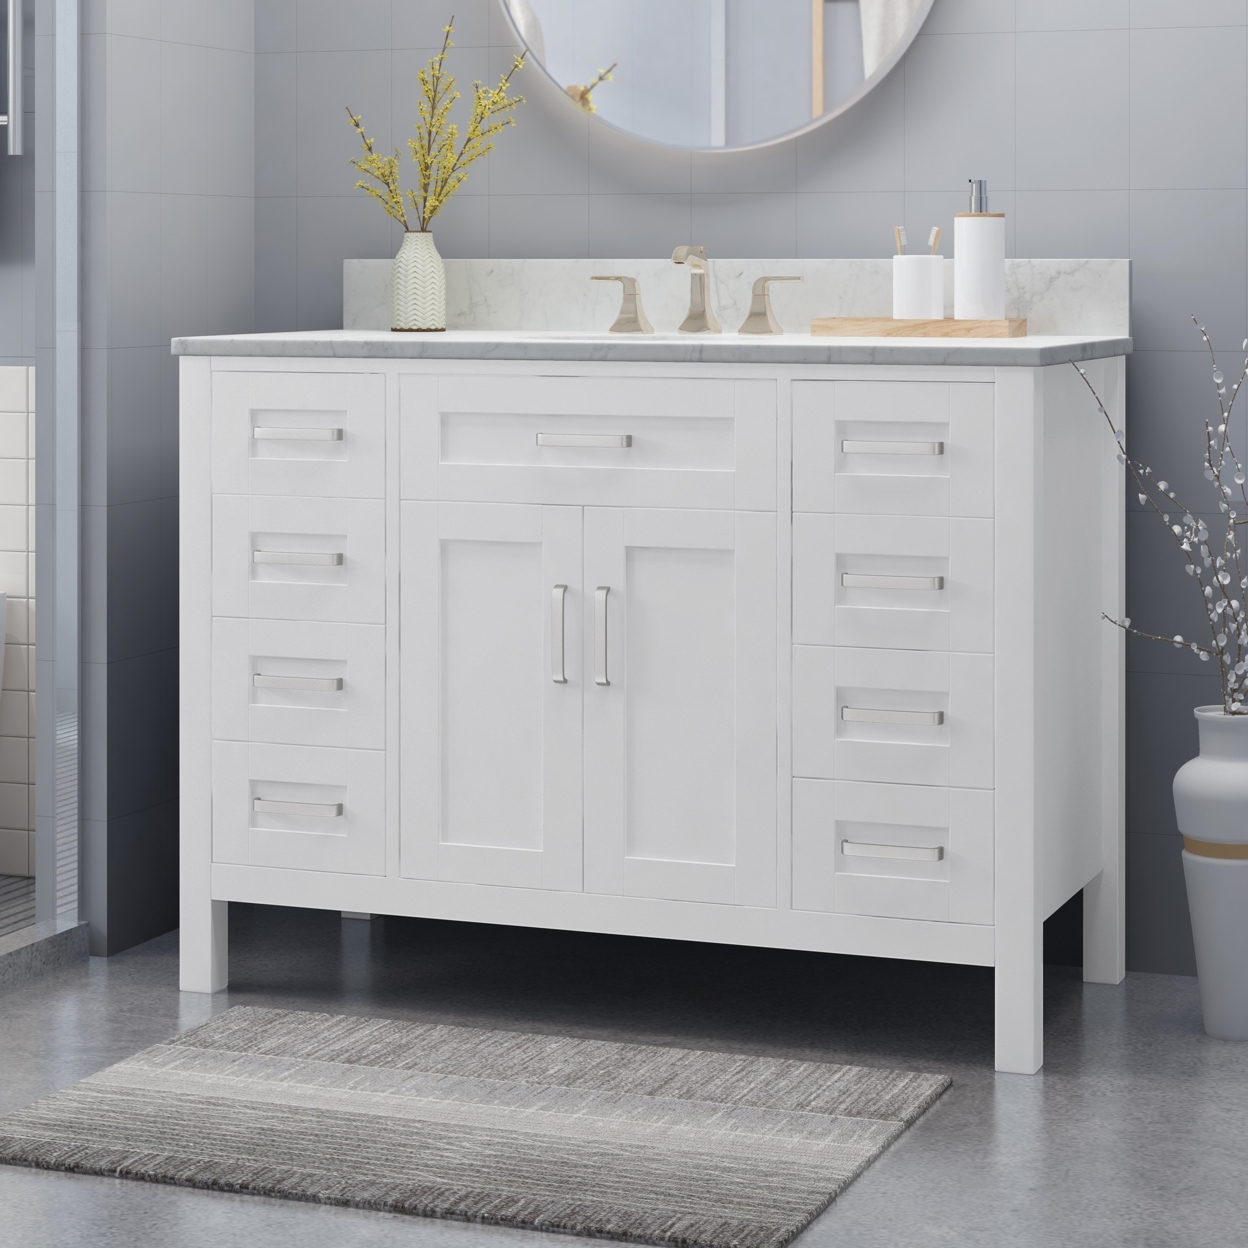 Greeley Contemporary 48 Wood Single Sink Bathroom Vanity With Marble Counter Top With Carrara White Marble - White